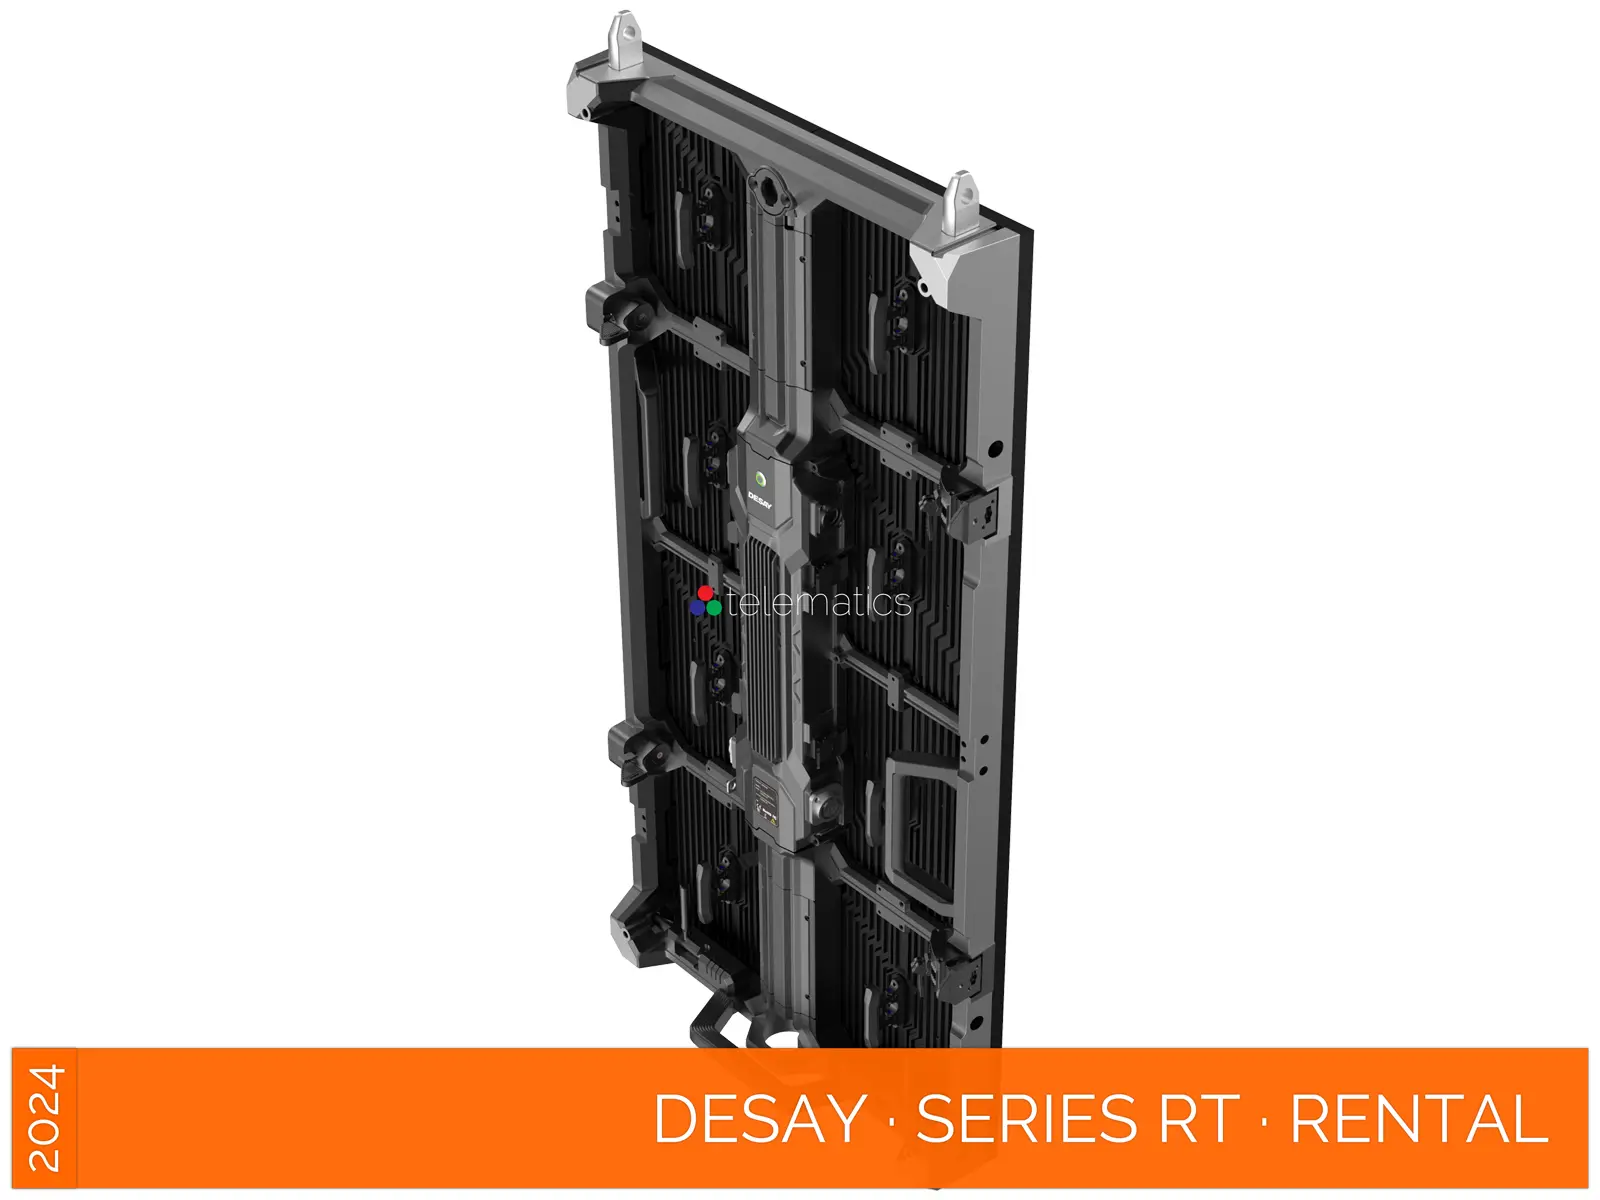 Desay · Series RT · Direct View LED Display Panel · Full Pixel Range · Rental Or Touring · Outdoor Rated · Rapid Service And Setup · Rugged Build For Rental Use · NovaStar COEX MX CX · Vision Management Platform · Viplex · review · price · cost · priced from $1,790 per square meter